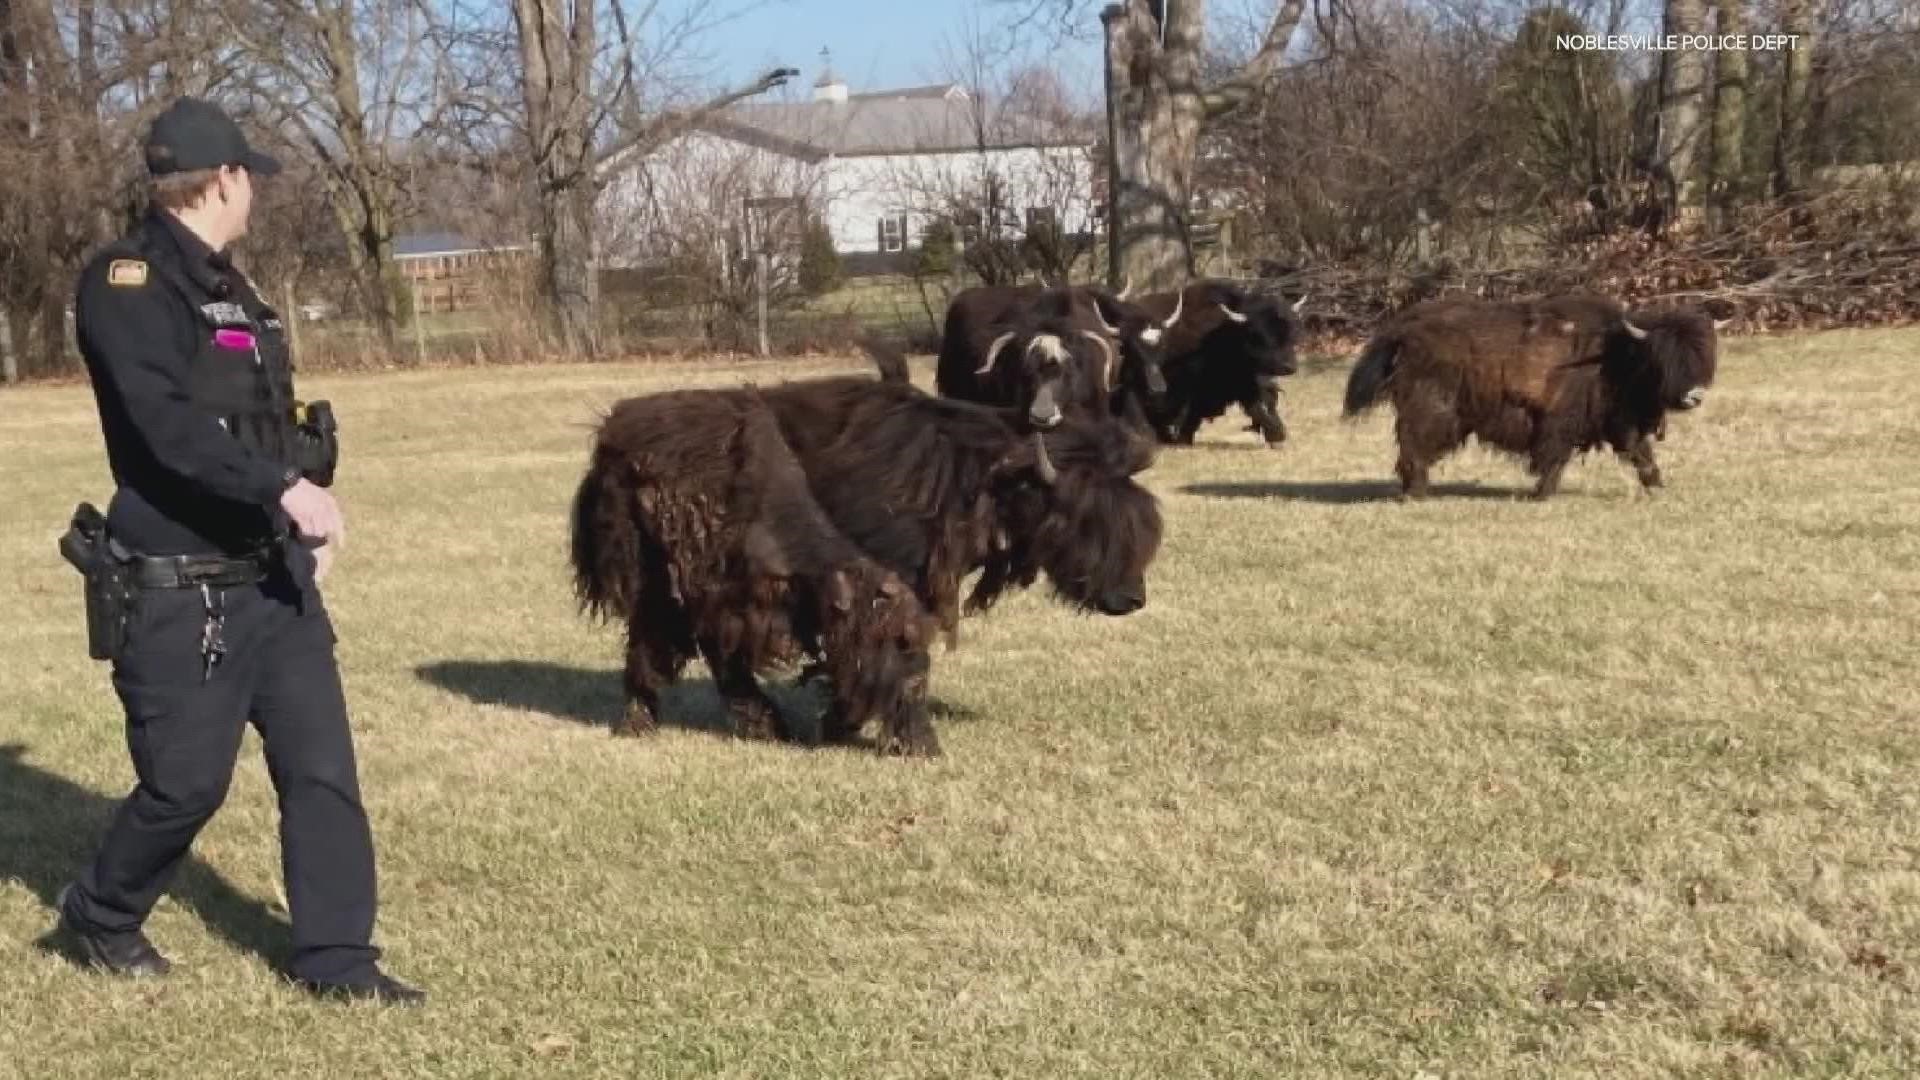 Some yaks on the loose in Noblesville today.  Police shared these pictures of them - calling them bison at first.